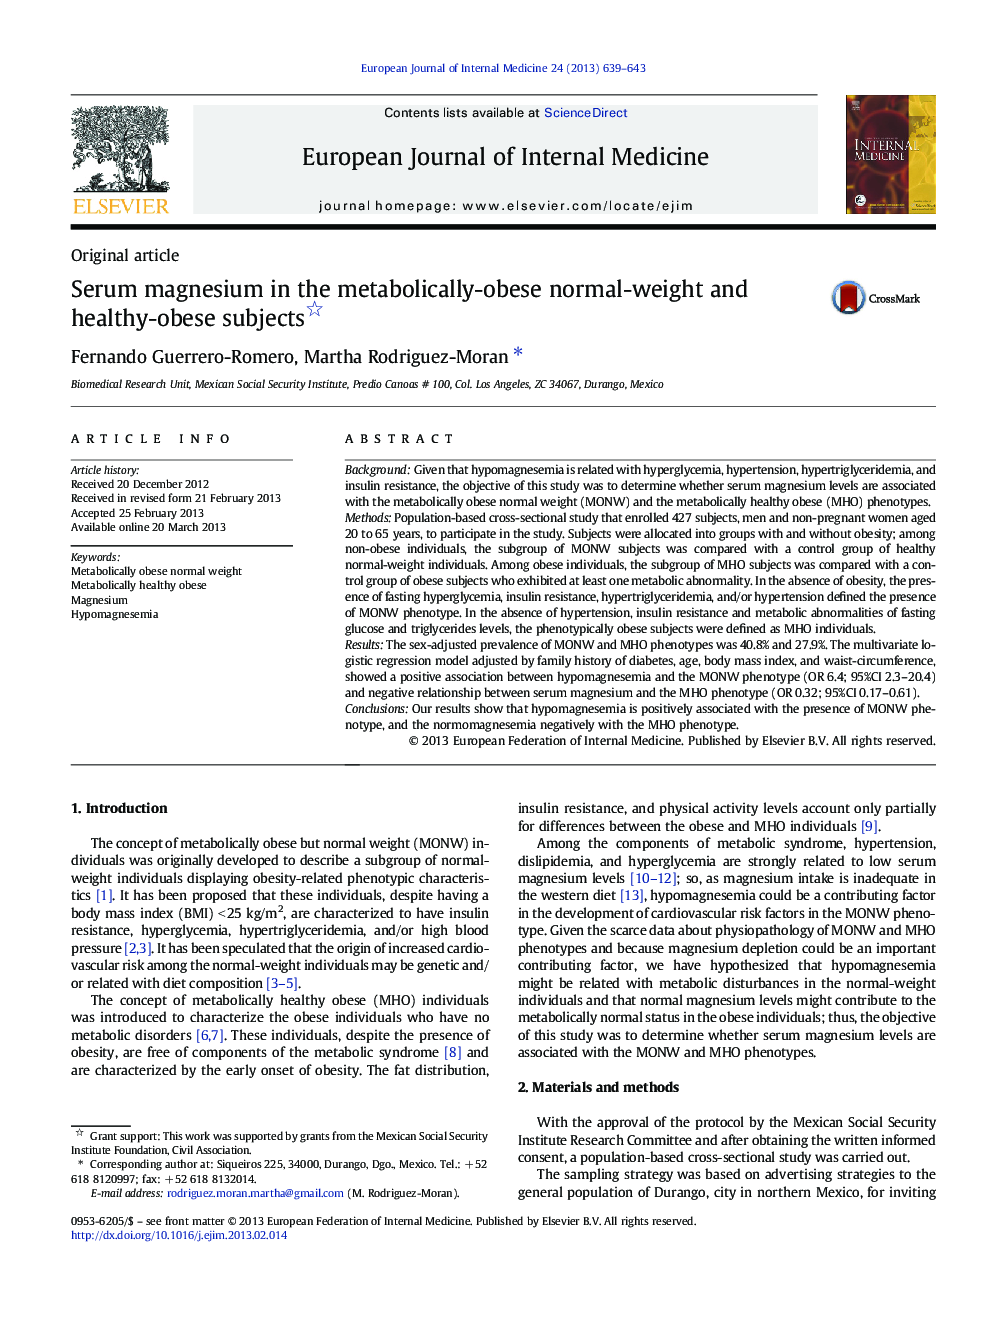 Serum magnesium in the metabolically-obese normal-weight and healthy-obese subjects